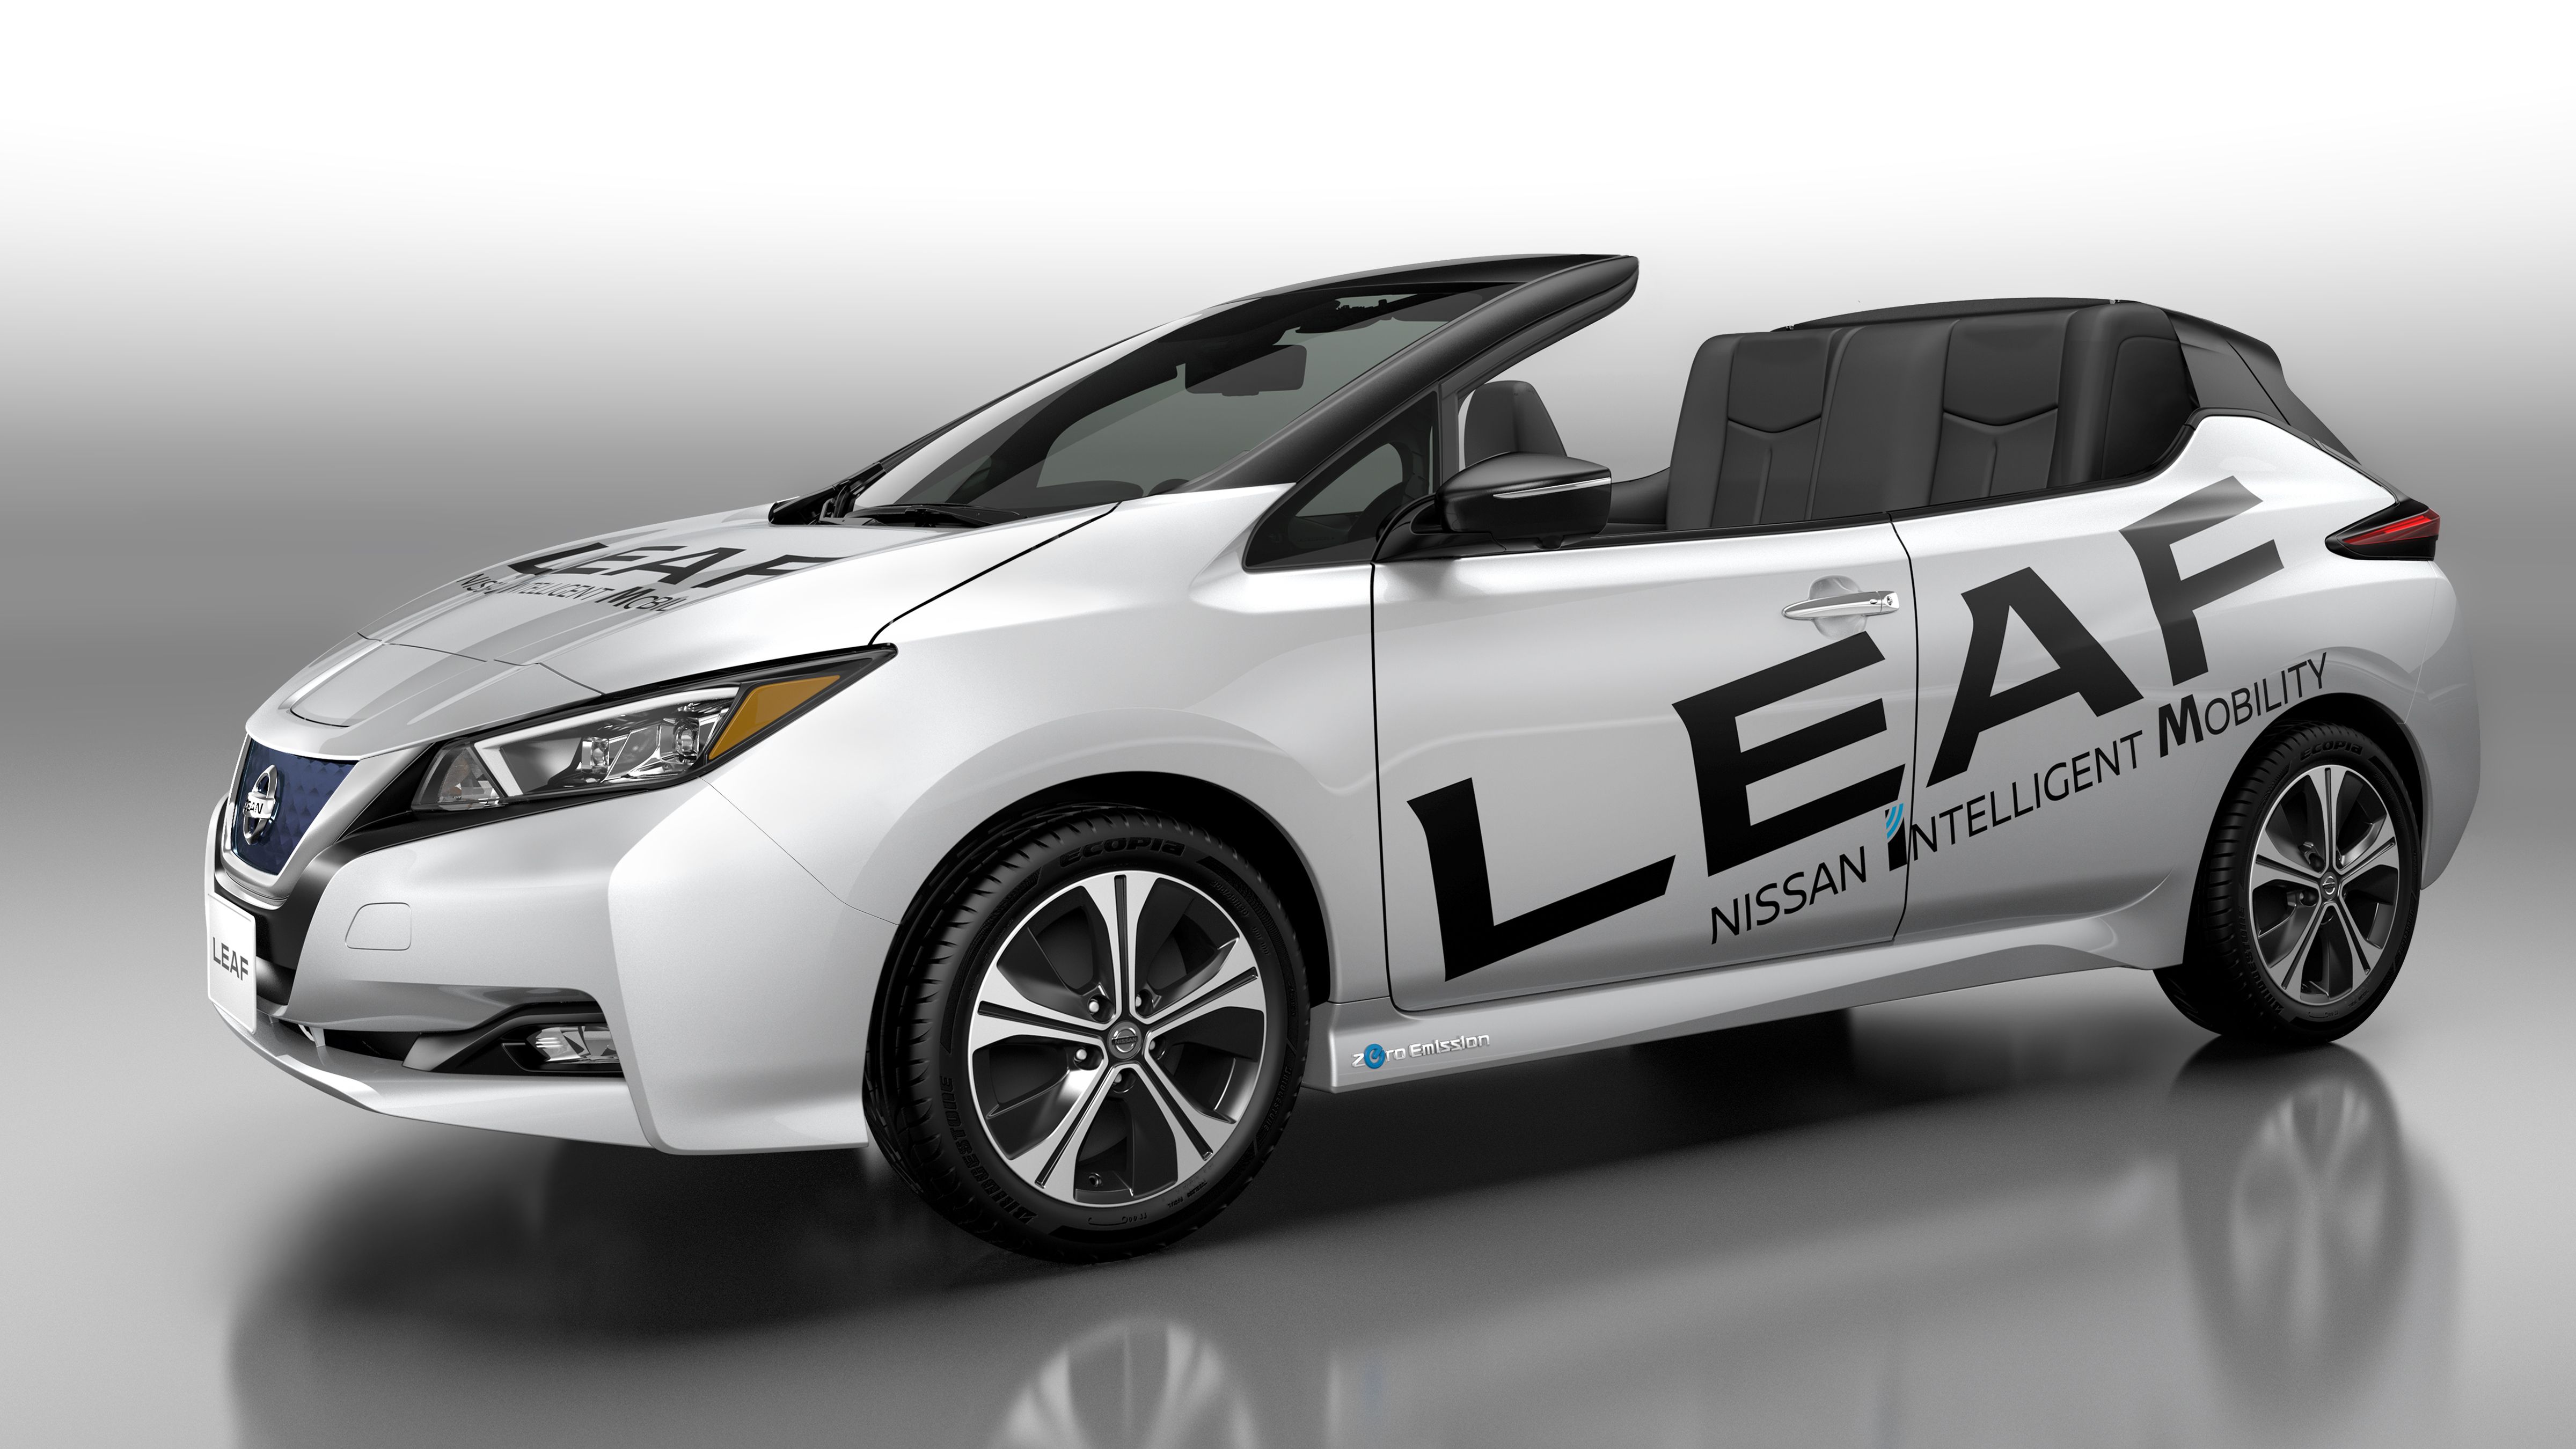 A Roofless Nissan Leaf Has Made Its Debut, And It's Mesmerizingly Ugly Picture, Photo, Wallpaper